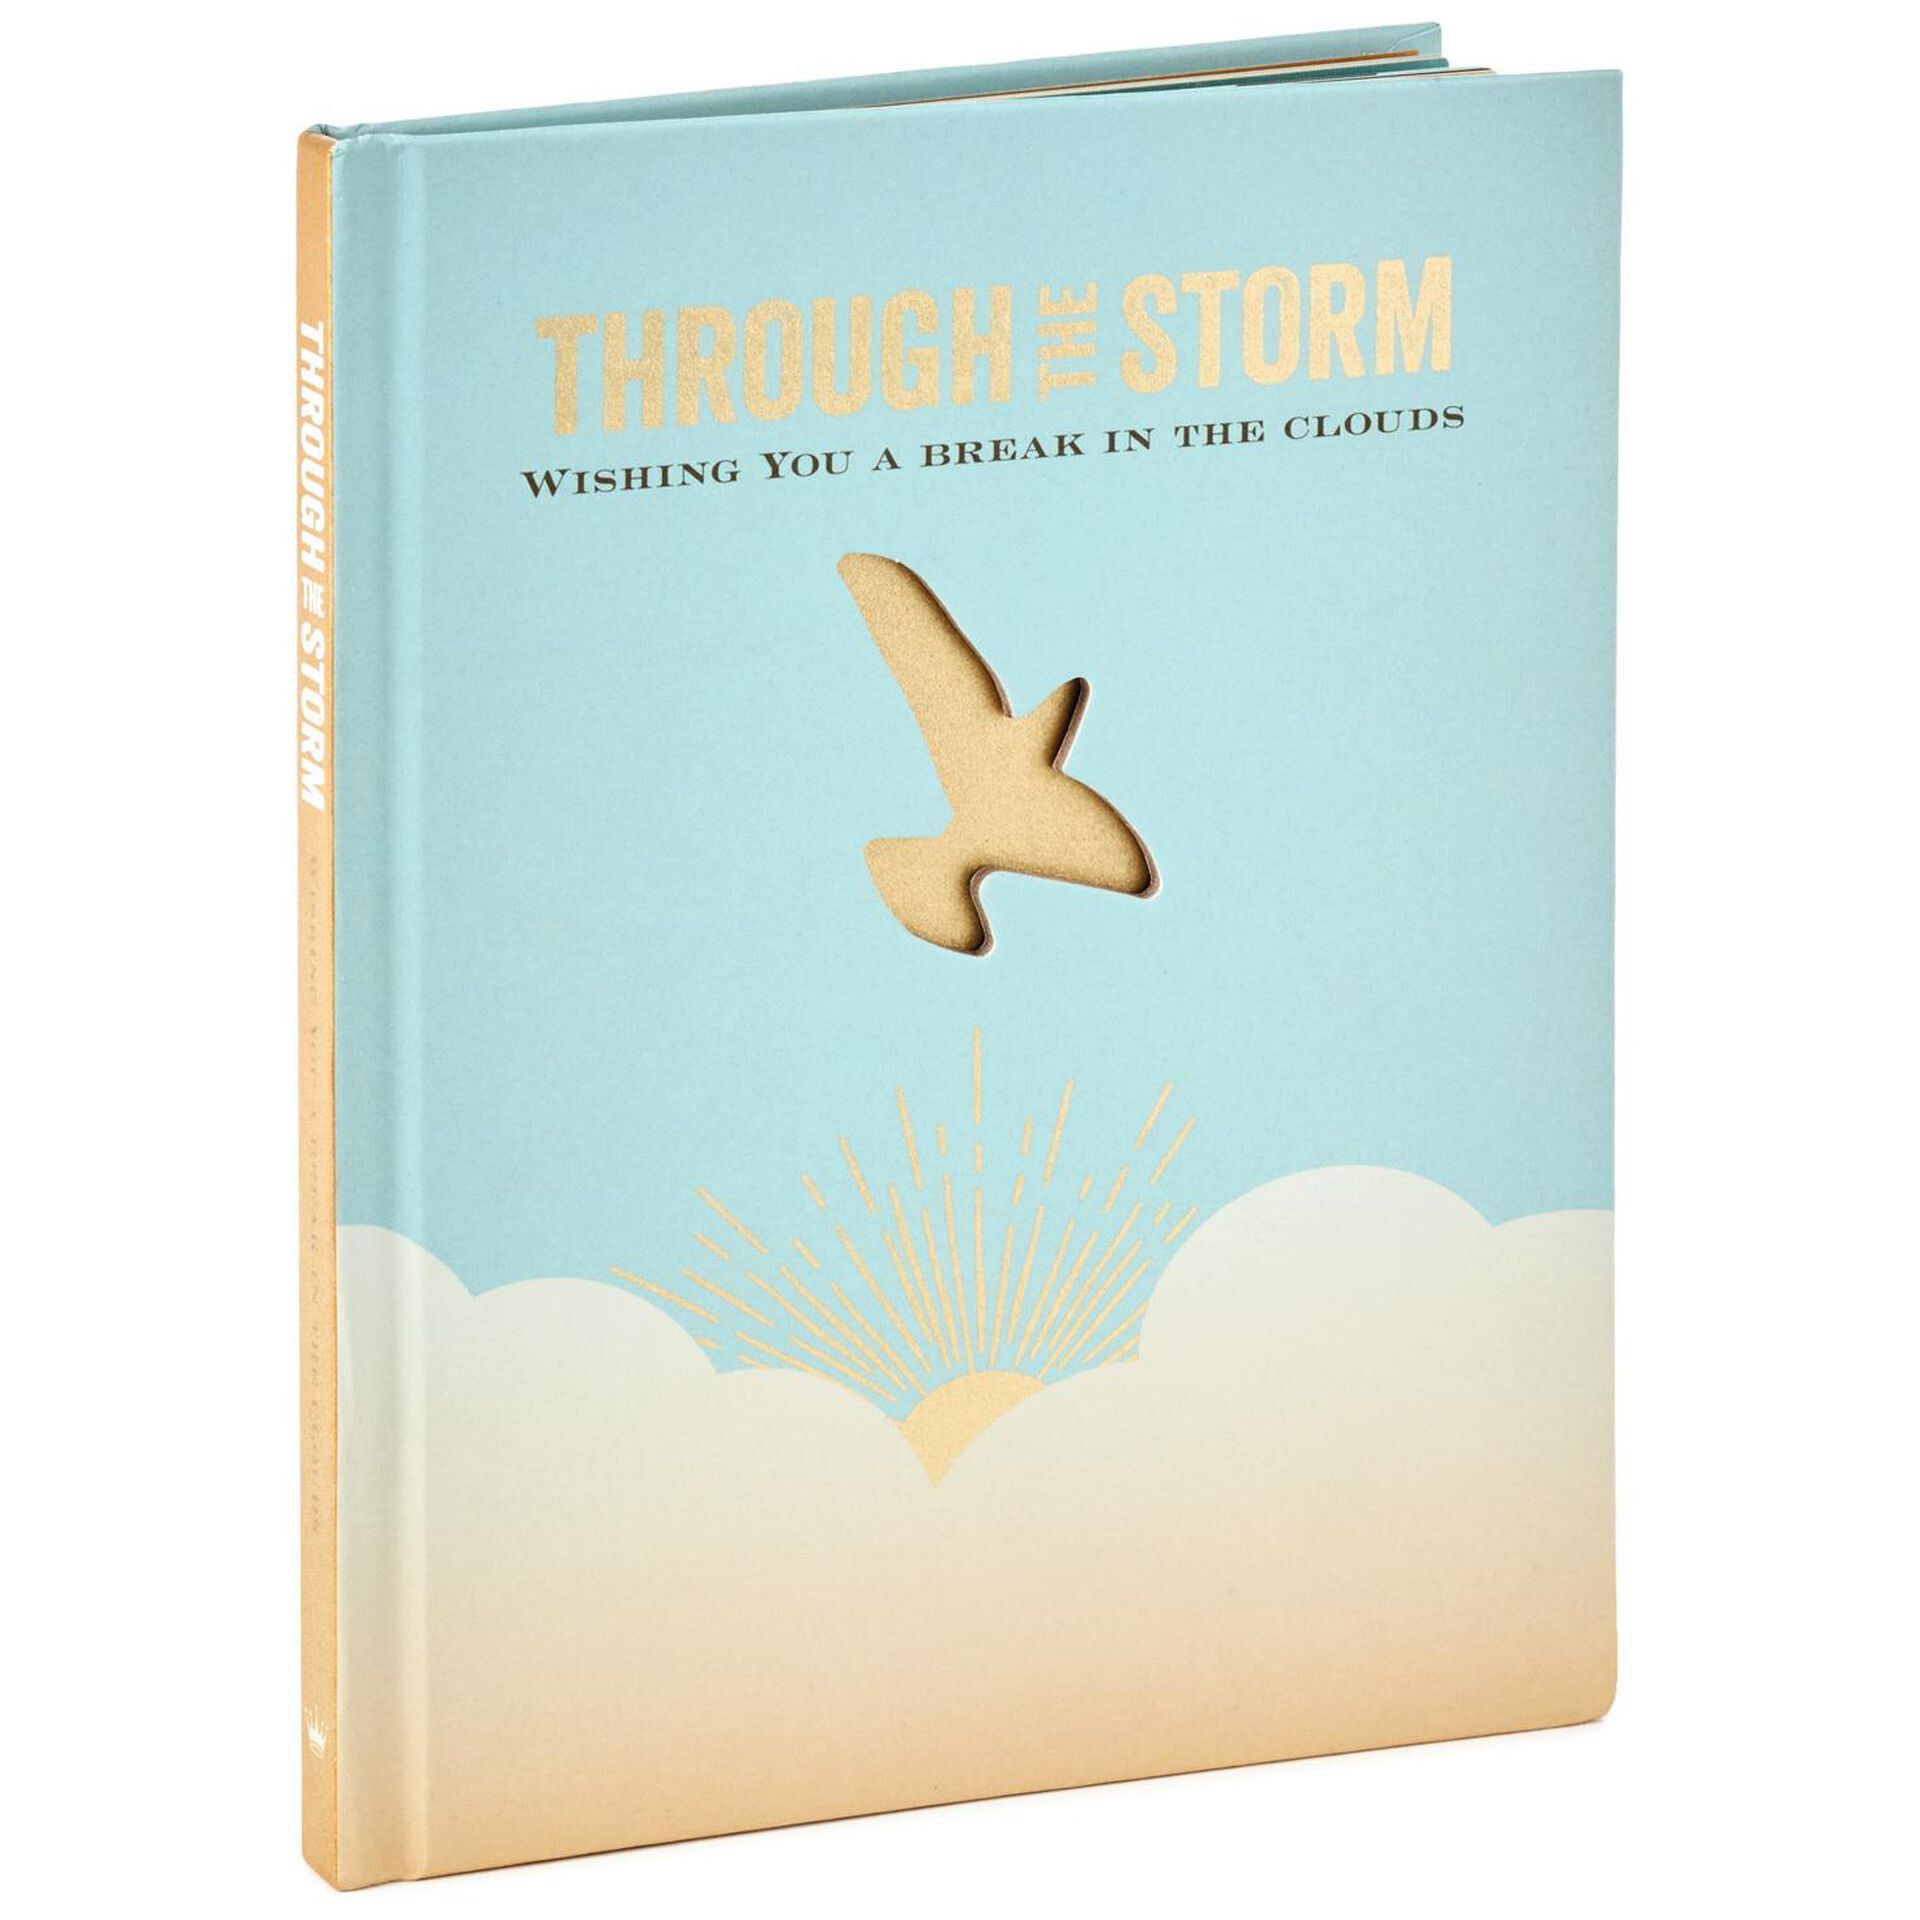 Through-the-Storm-Wishing-You-a-Break-in-the-Clouds-Book-root-1BOK1413_BOK1413_1470_1.jpg_Source_Image.jpg